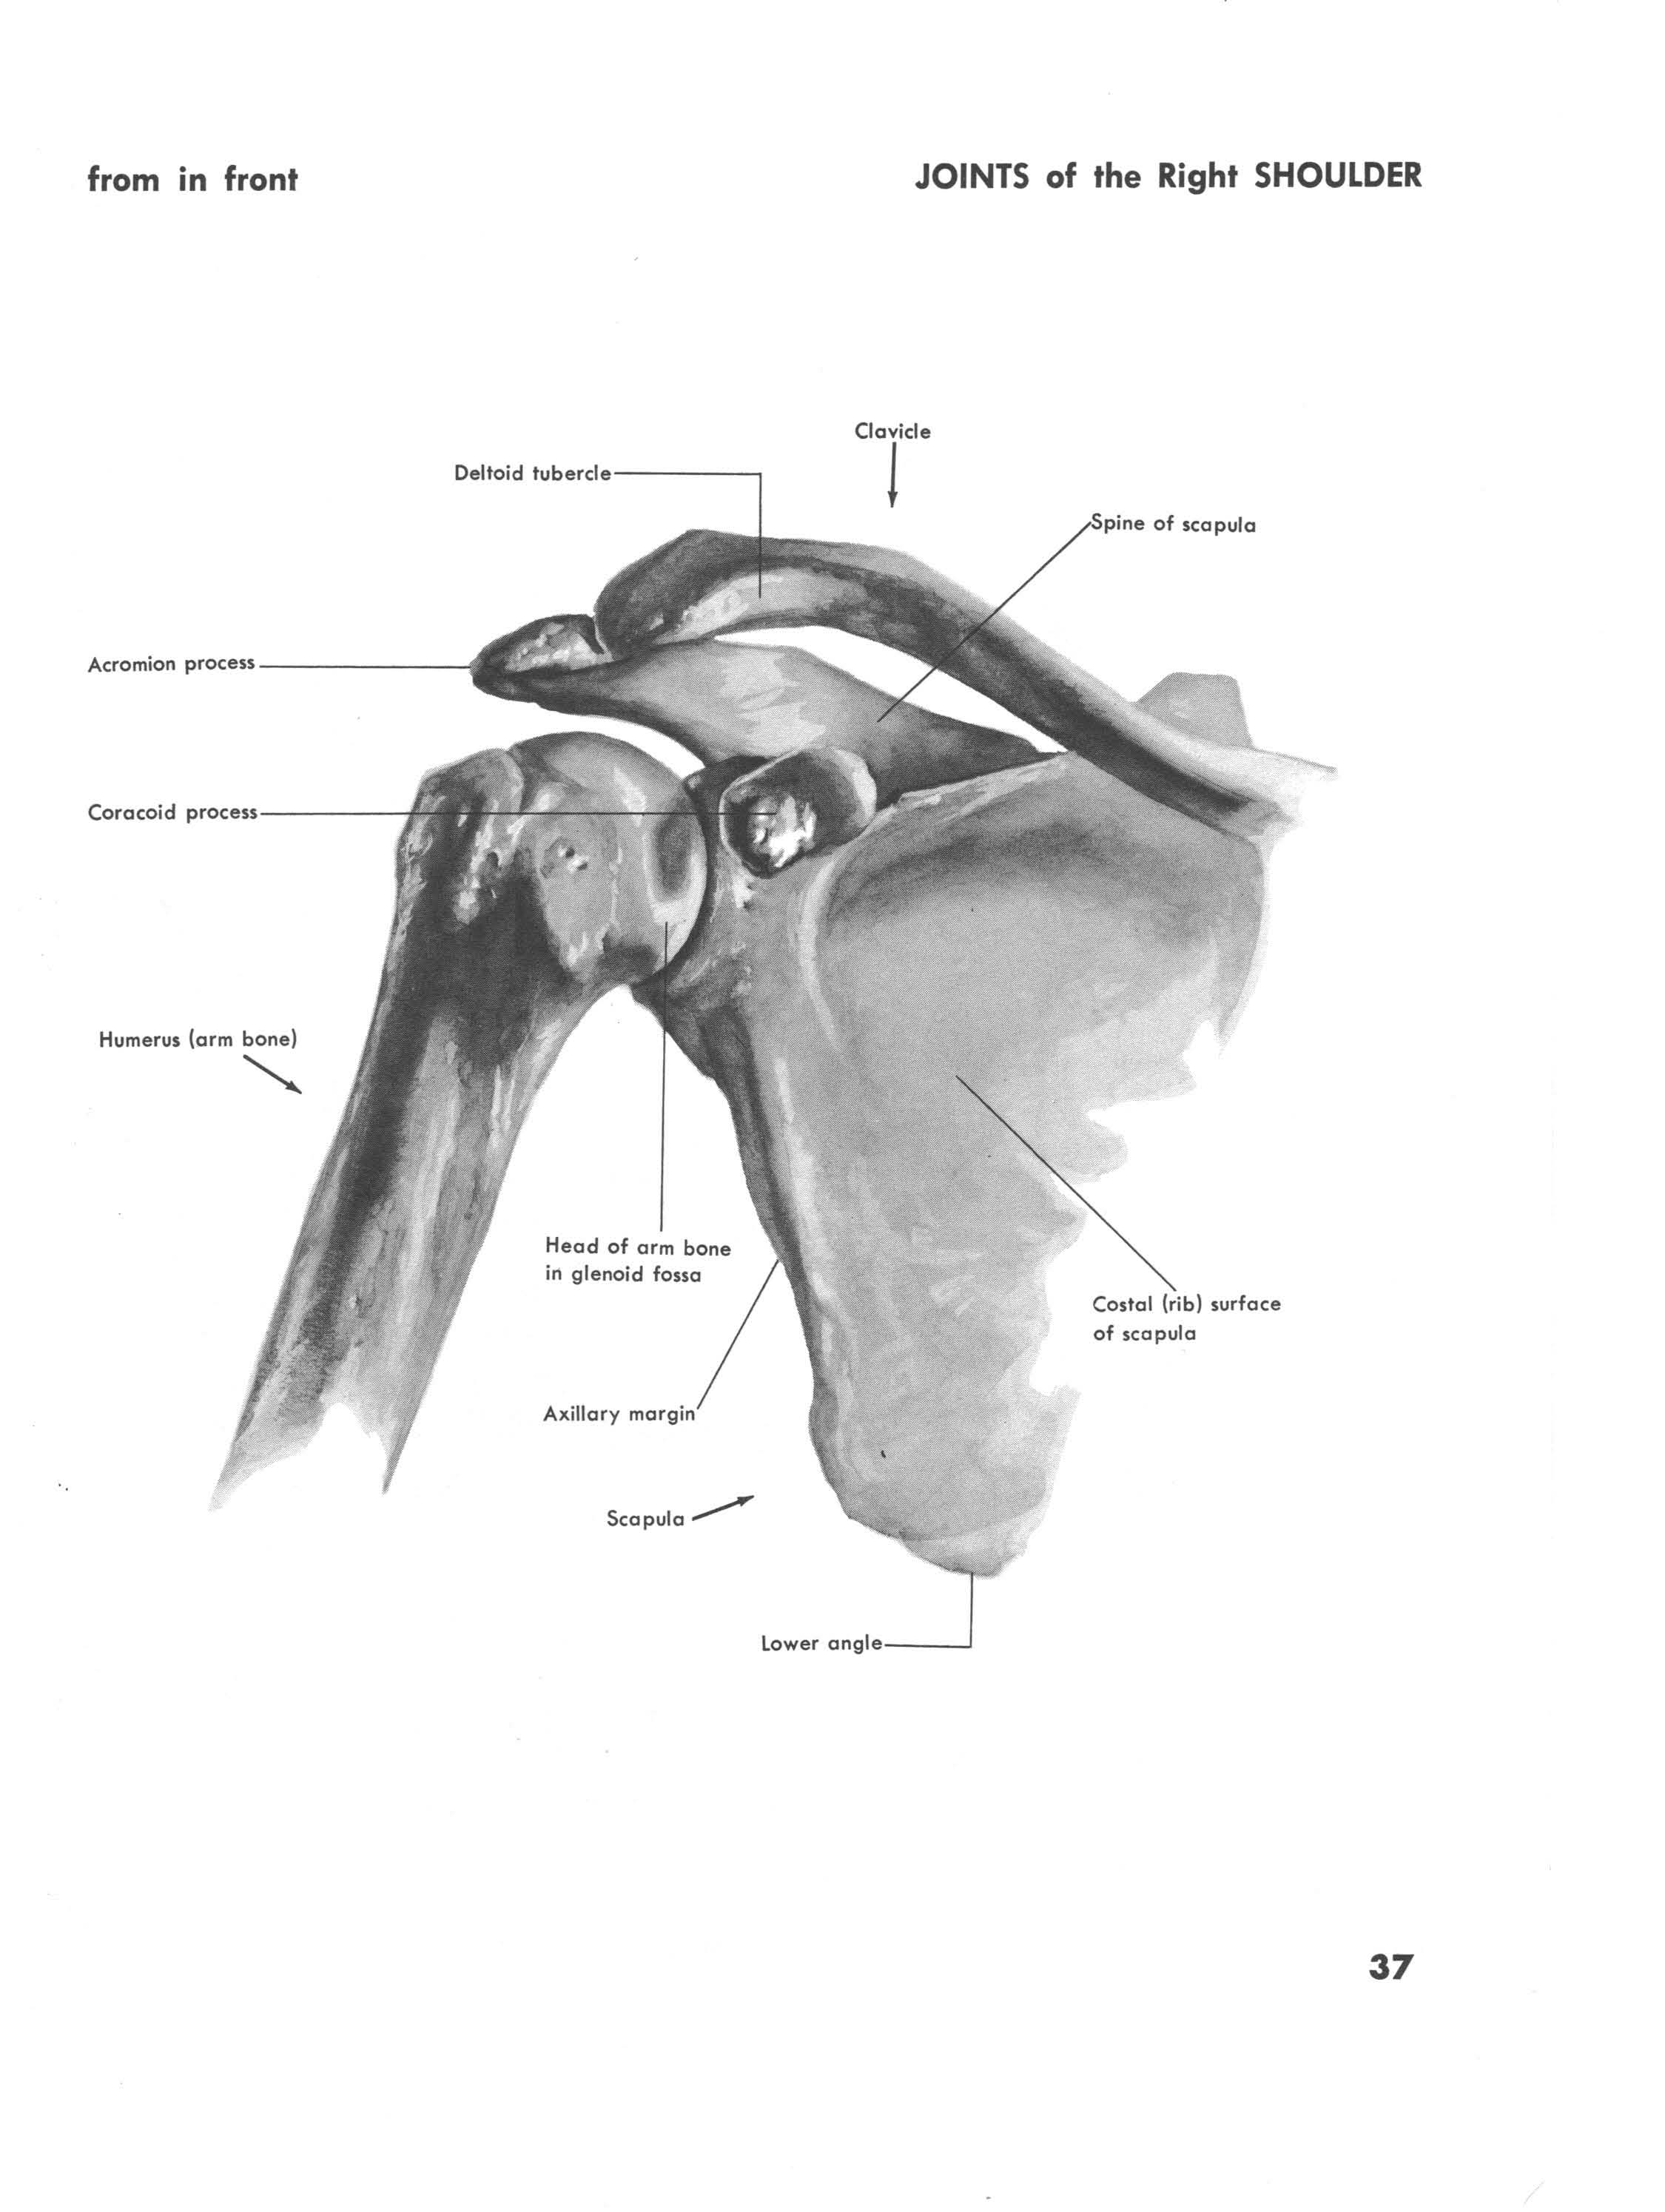 Joints of the Right Shoulder